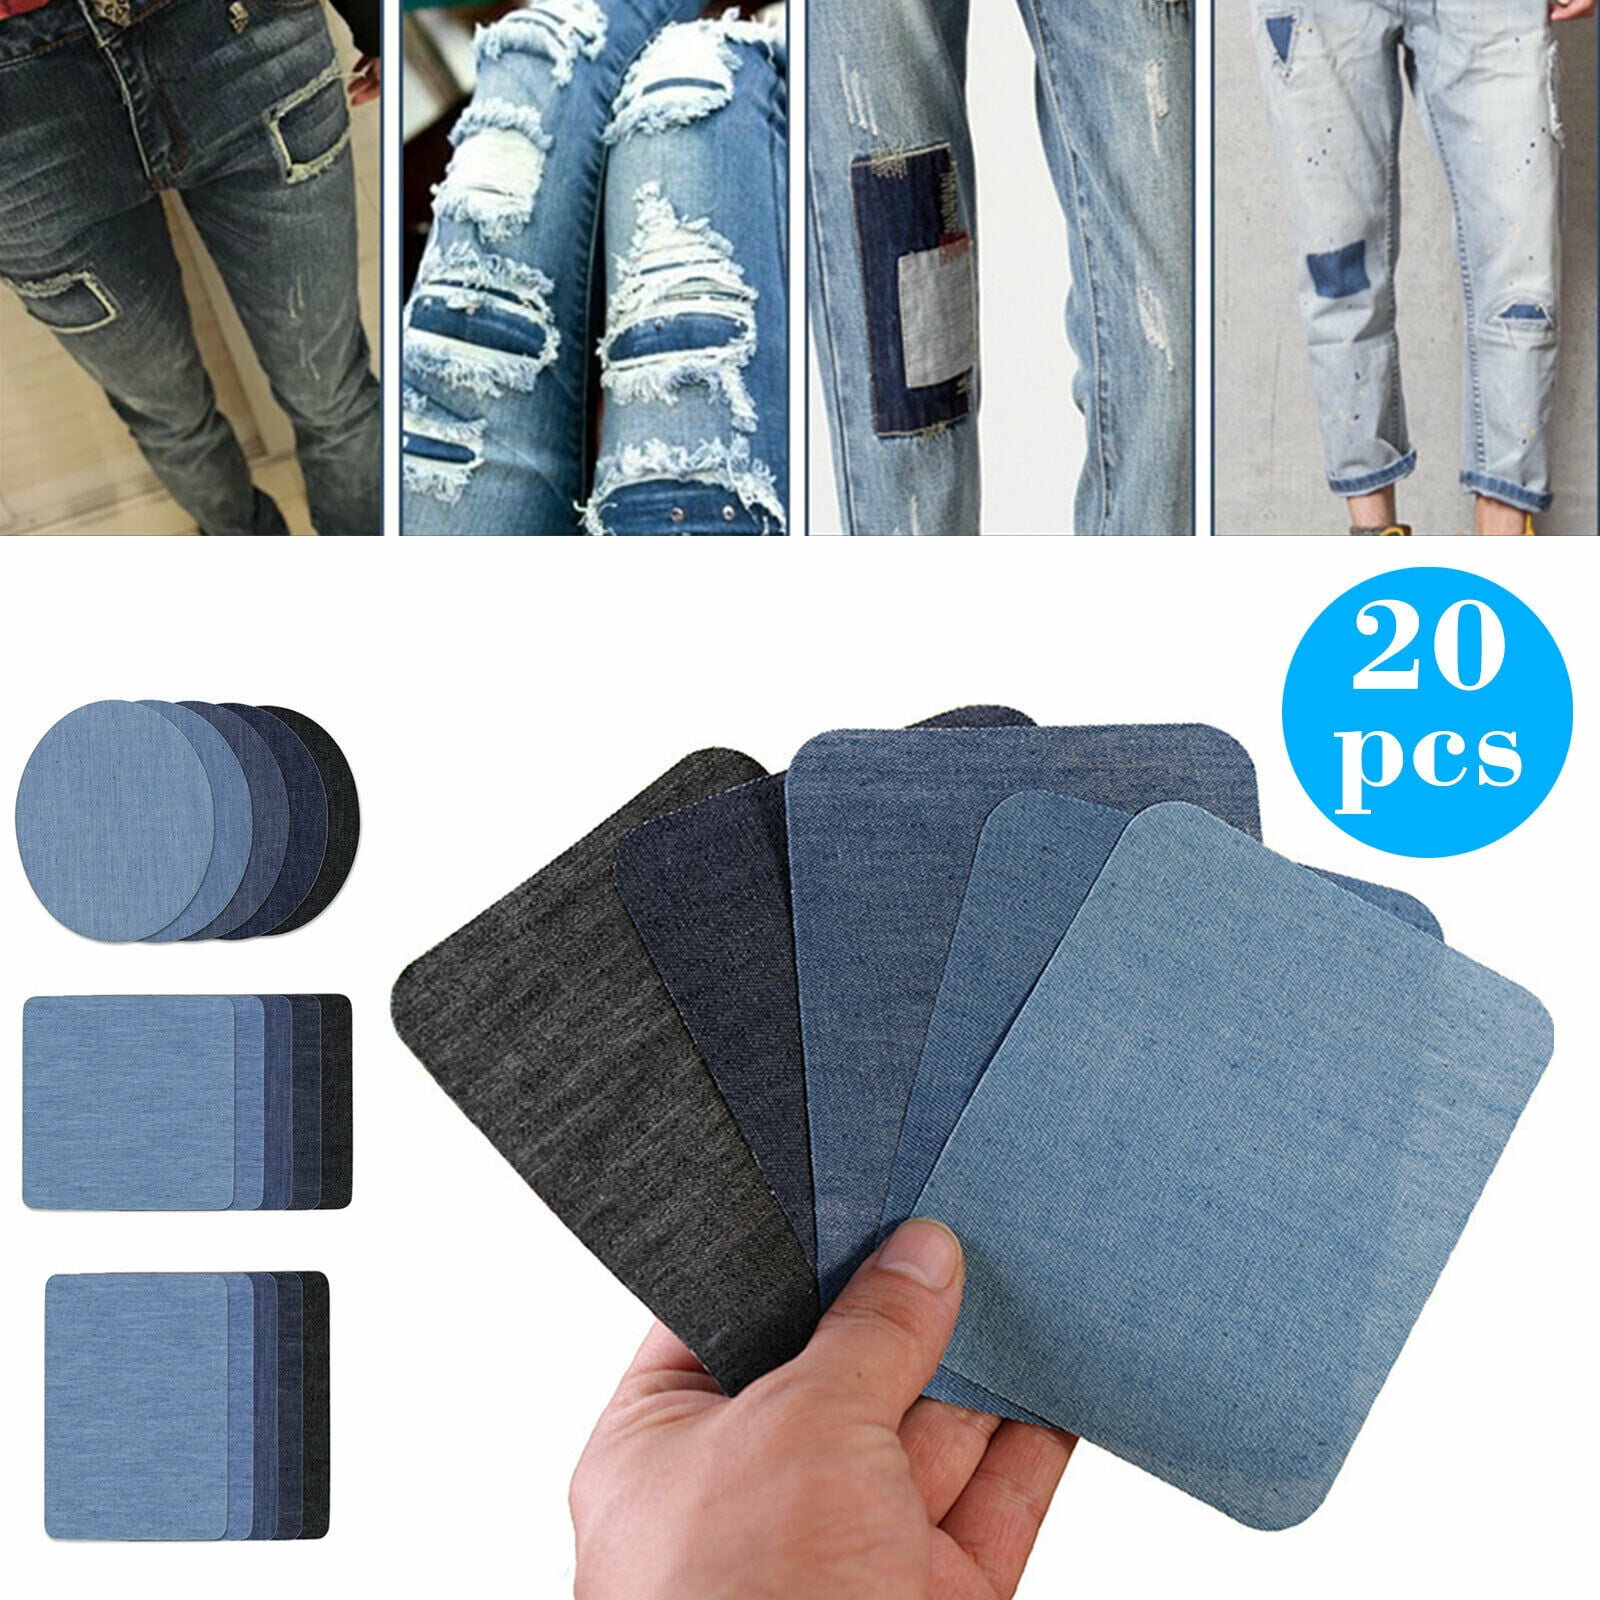 20x Denim Jeans Patches Iron On Patchwork Sewing Clothes Repairing Applique 